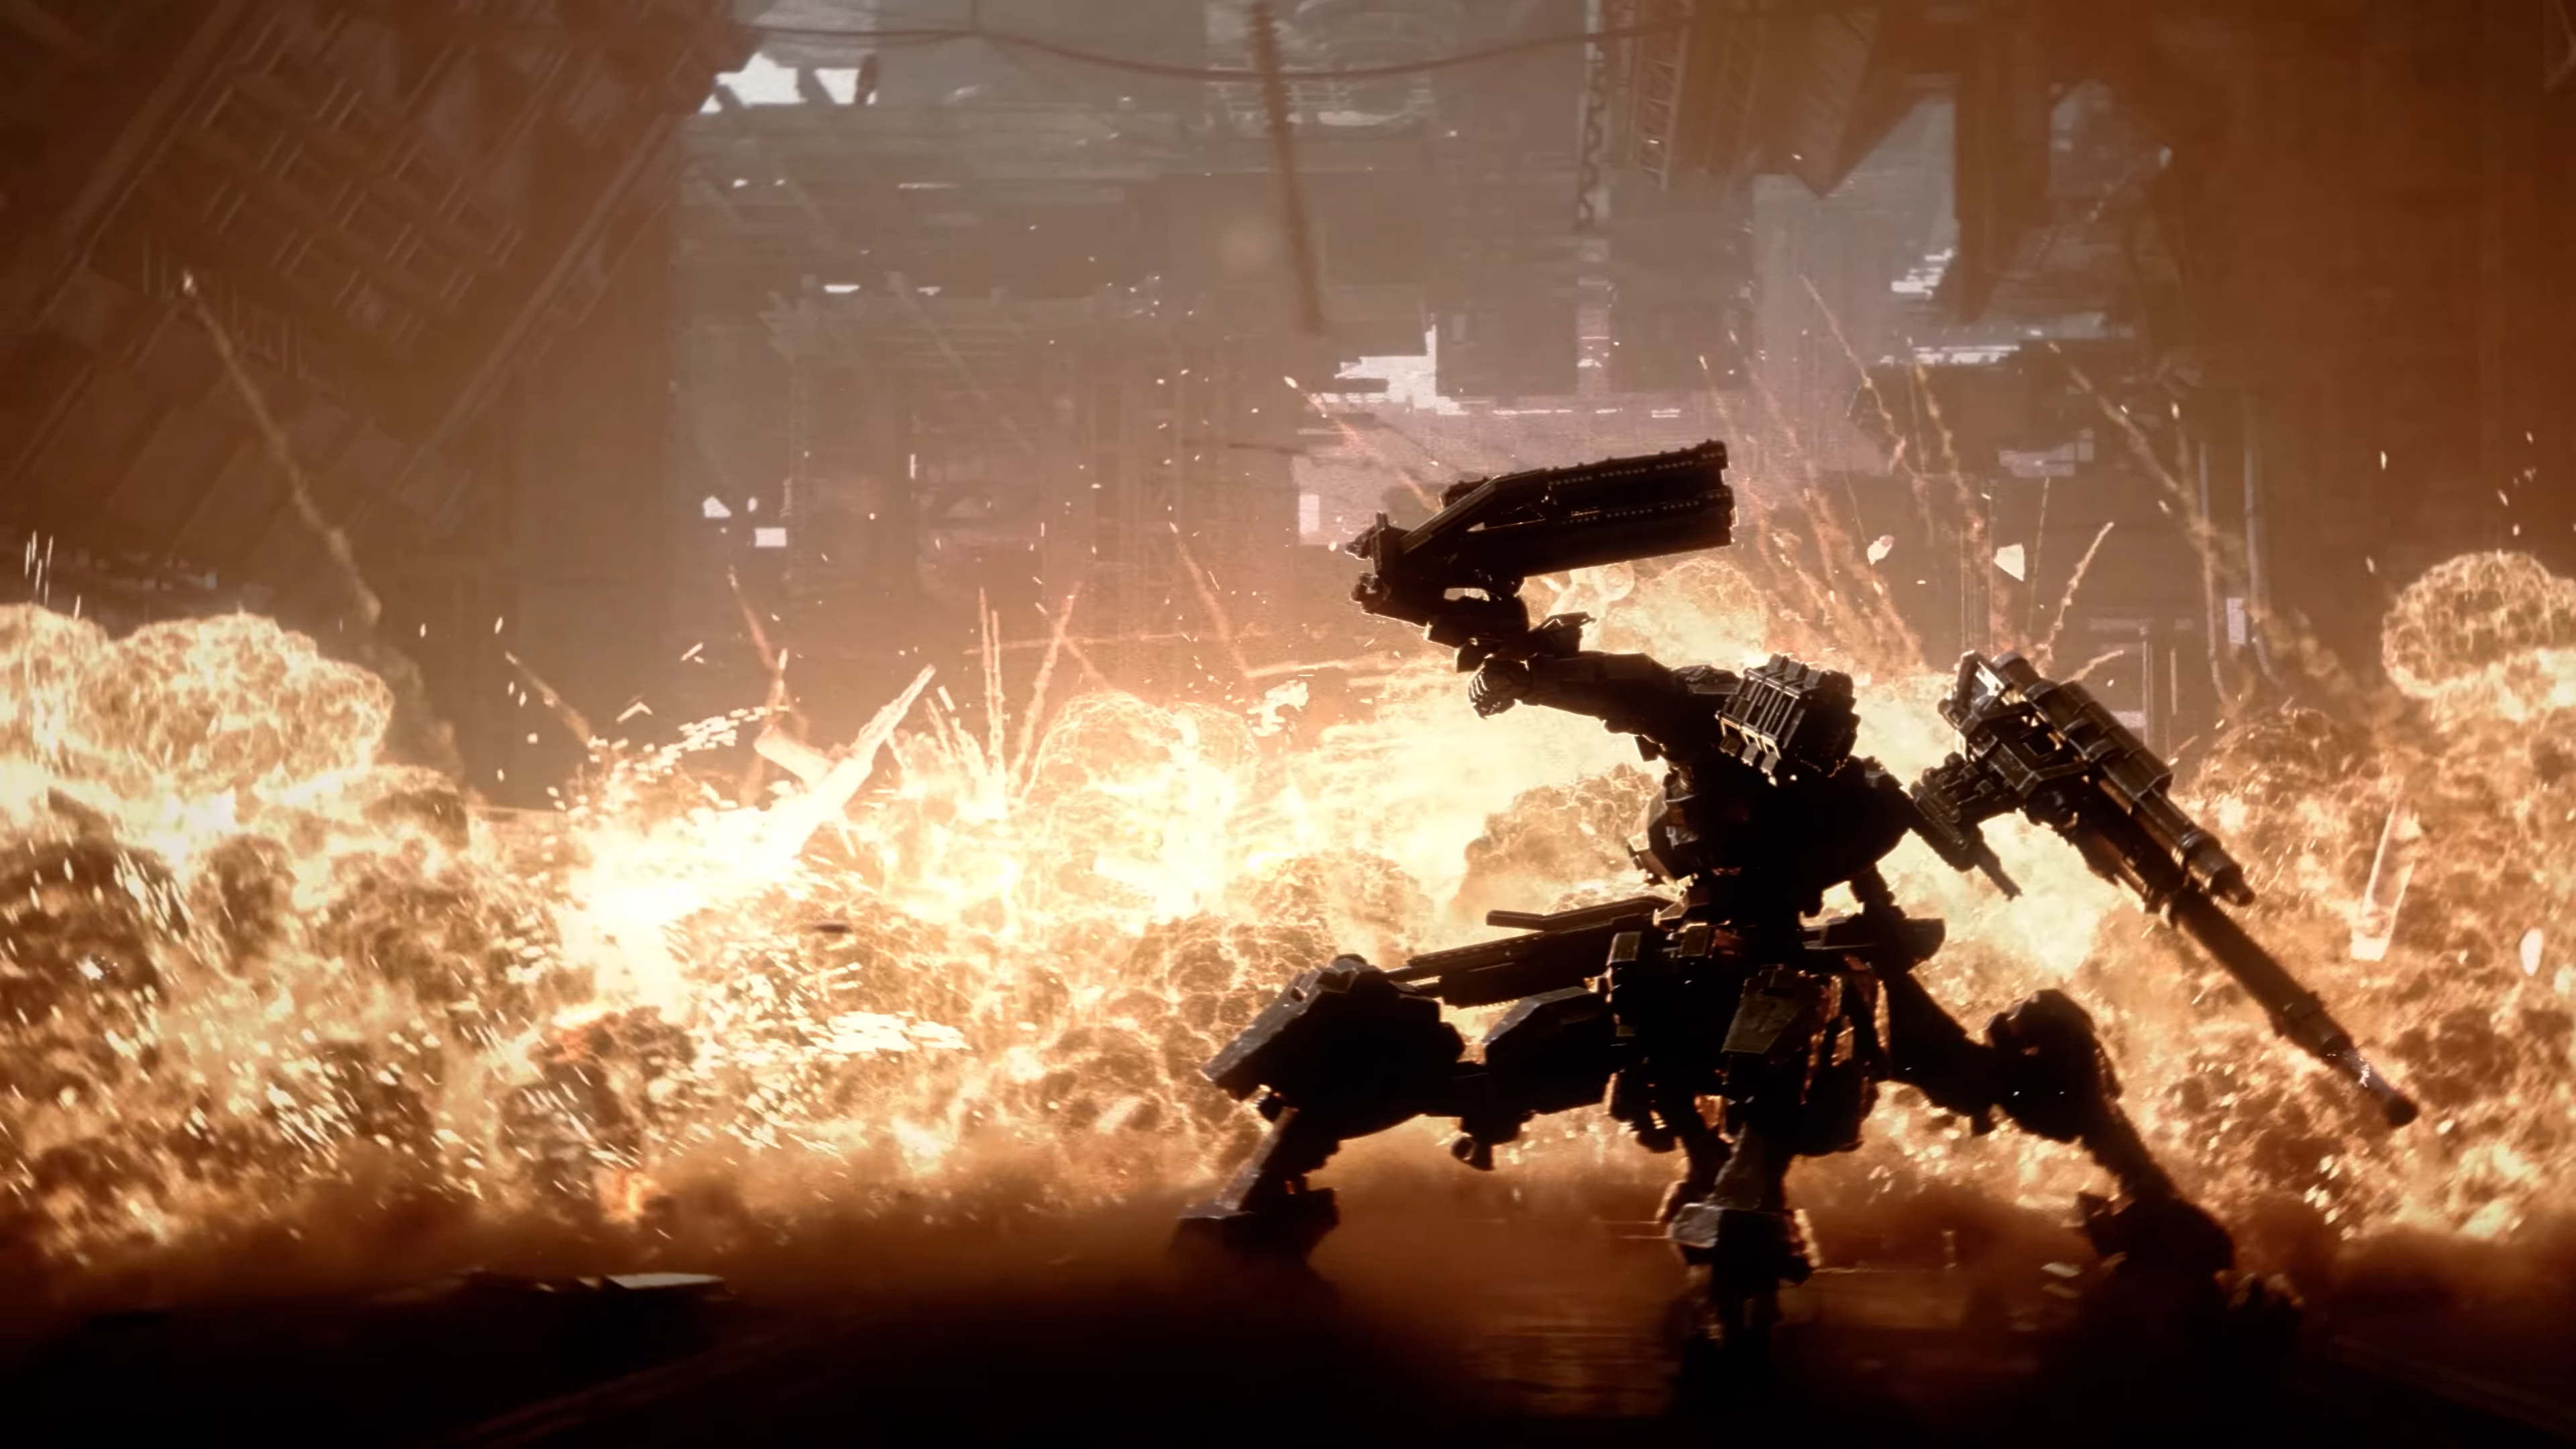 Armored Core Armored Core Vi Video Games Video Game Art Mechs Robot Fire 3840x2160